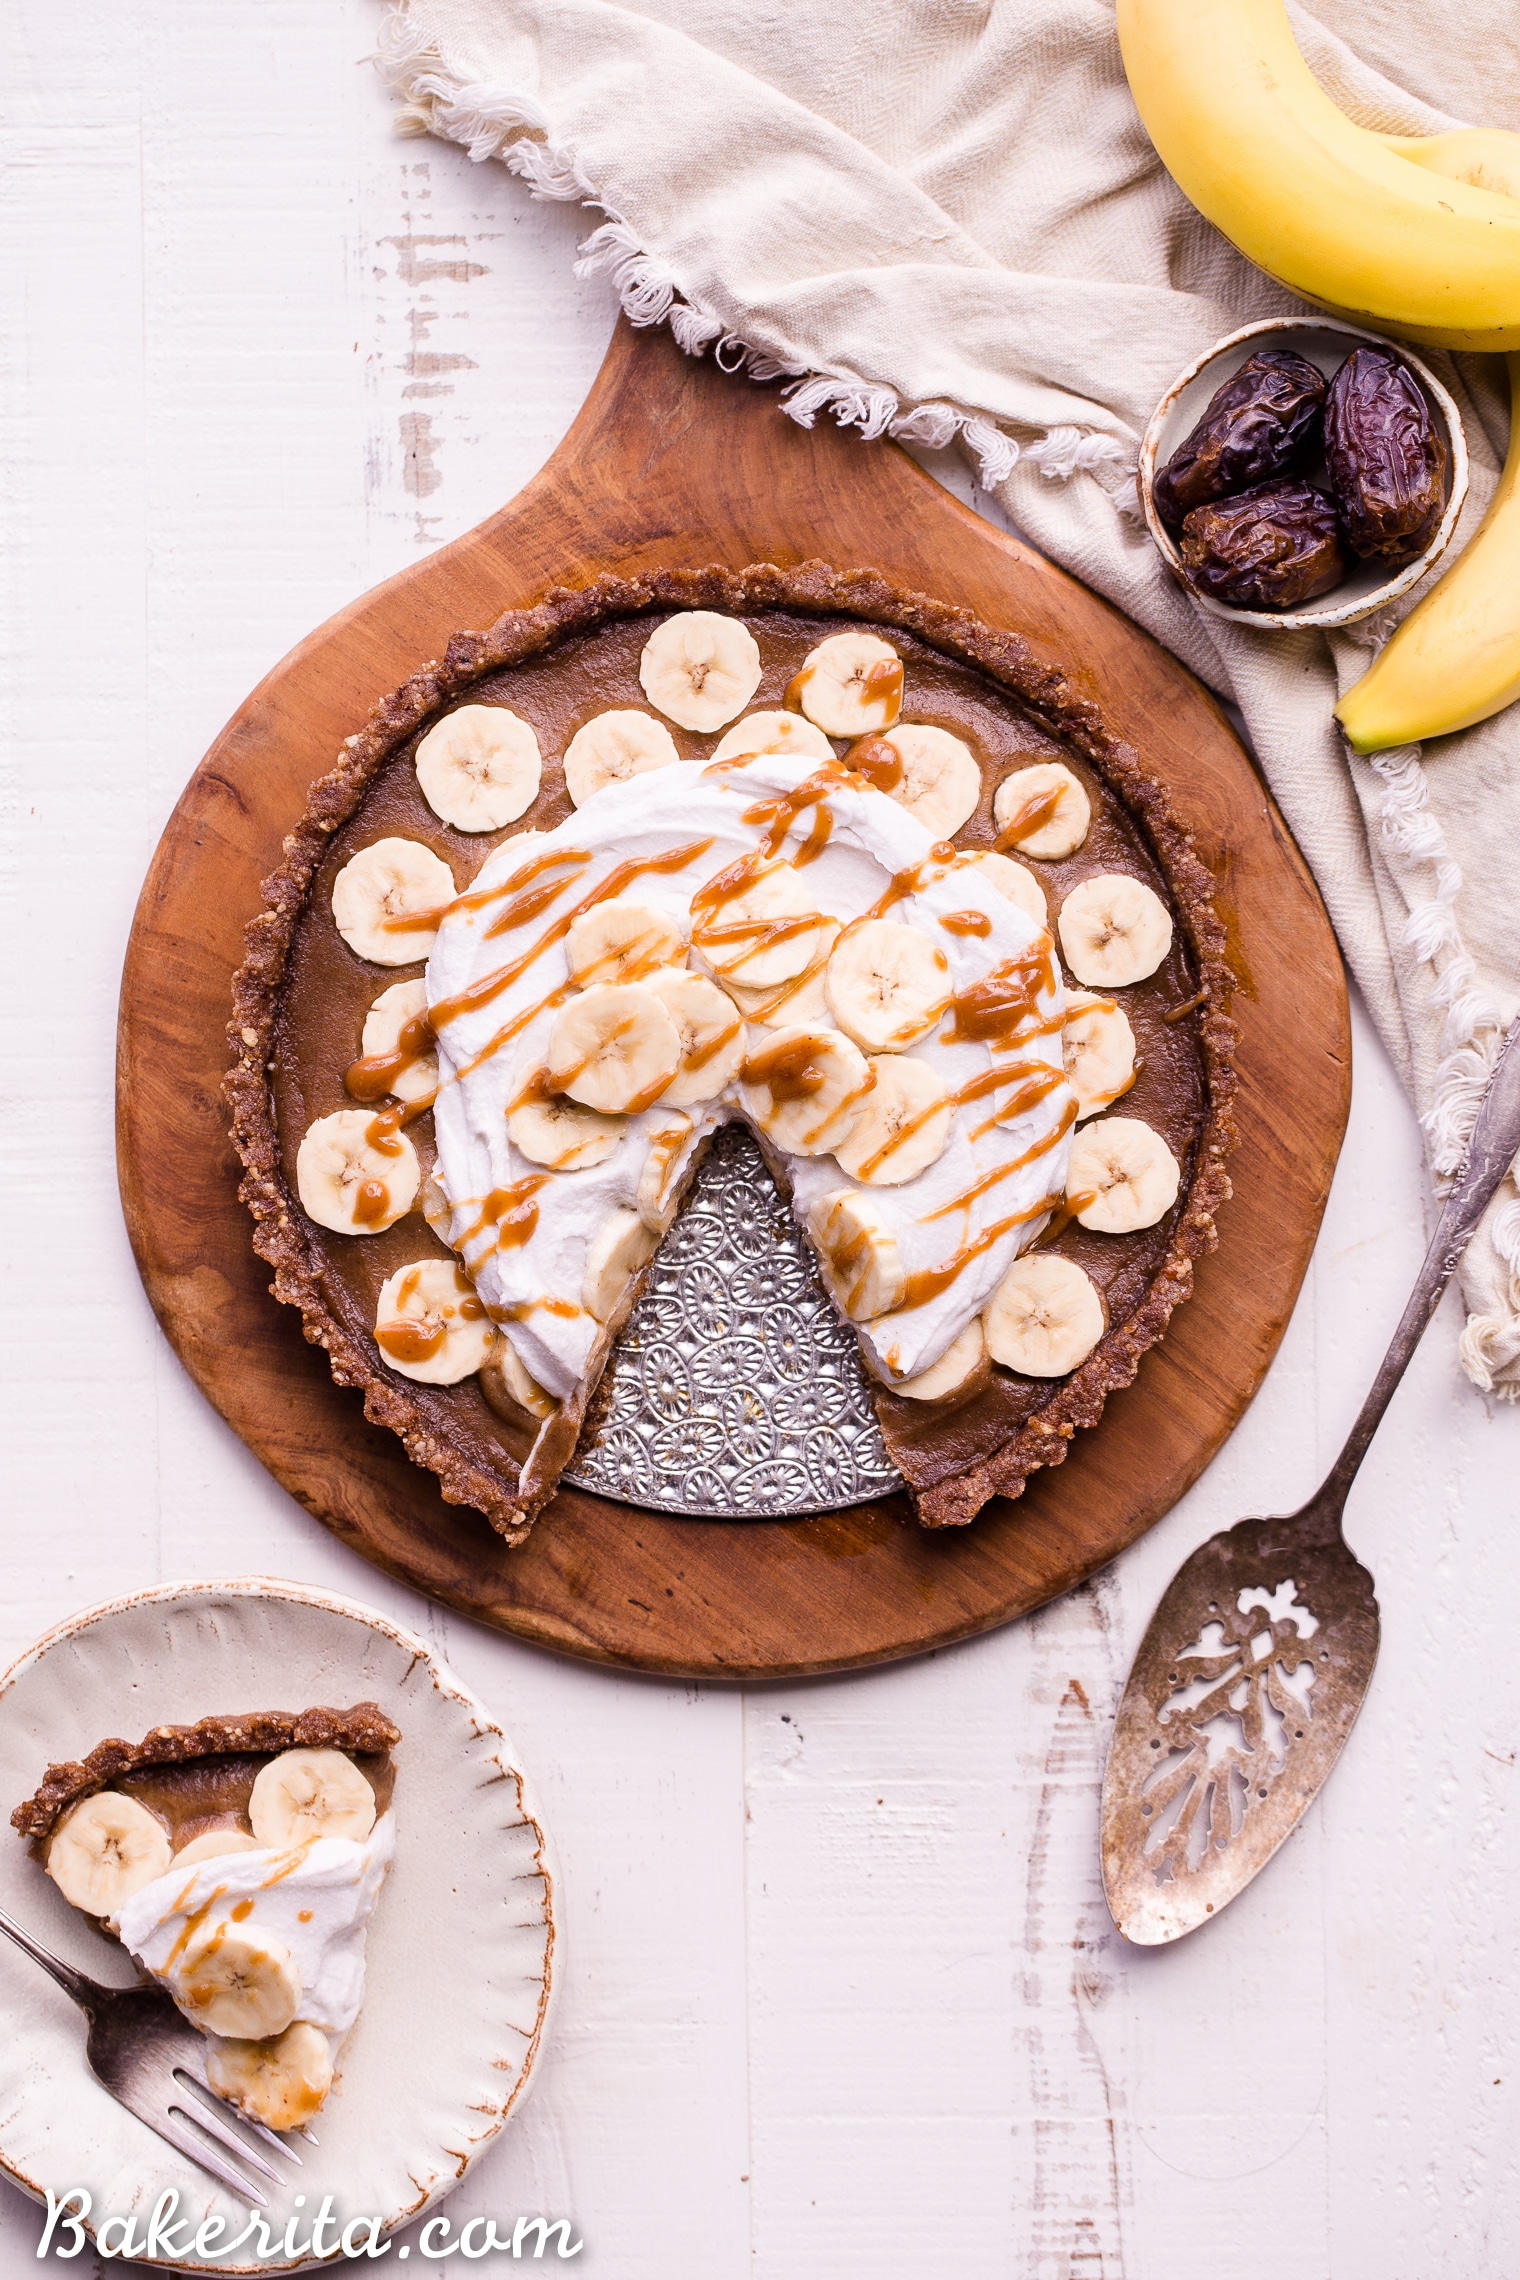 This No Bake Banana Caramel Tart is similar to a classic Banoffee pie, but there's no baking necessary and it's sweetened entirely with dates! This healthy twist on a classic is sweet and scrumptious with a date caramel filling and coconut whipped cream on top. It's gluten-free, paleo, and vegan.